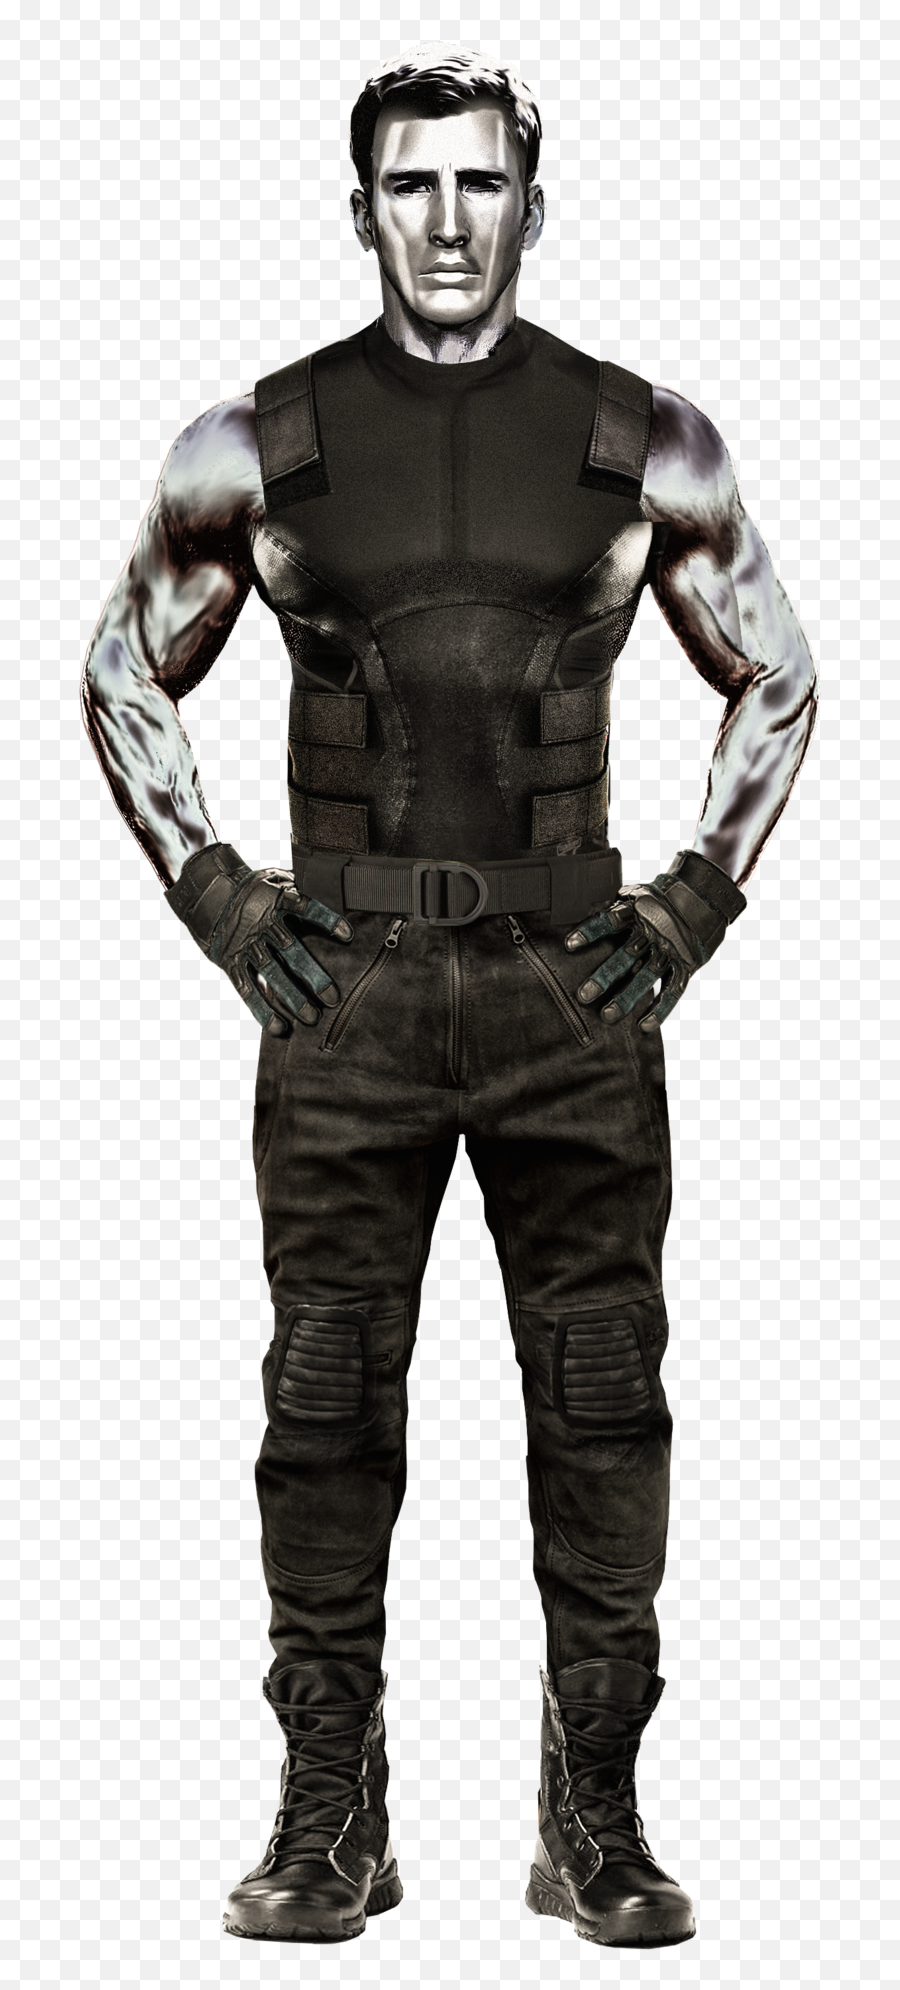 Colossus Png Hd - Expendables 2 Lee Christmas,Colossus Png